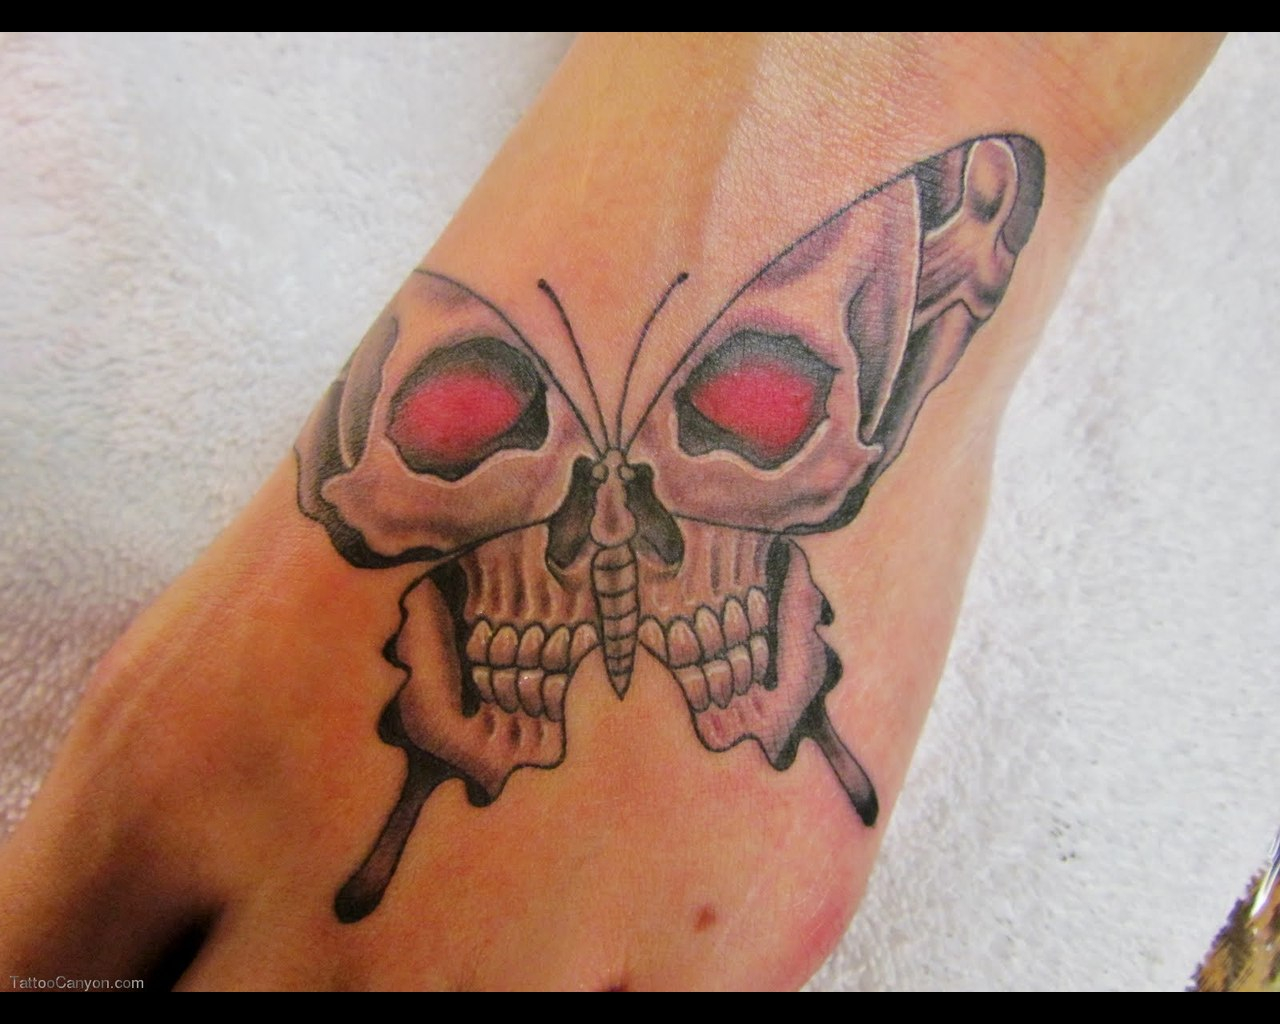 Black Skull Butterfly Tattoo On Foot pertaining to dimensions 1280 X 1024